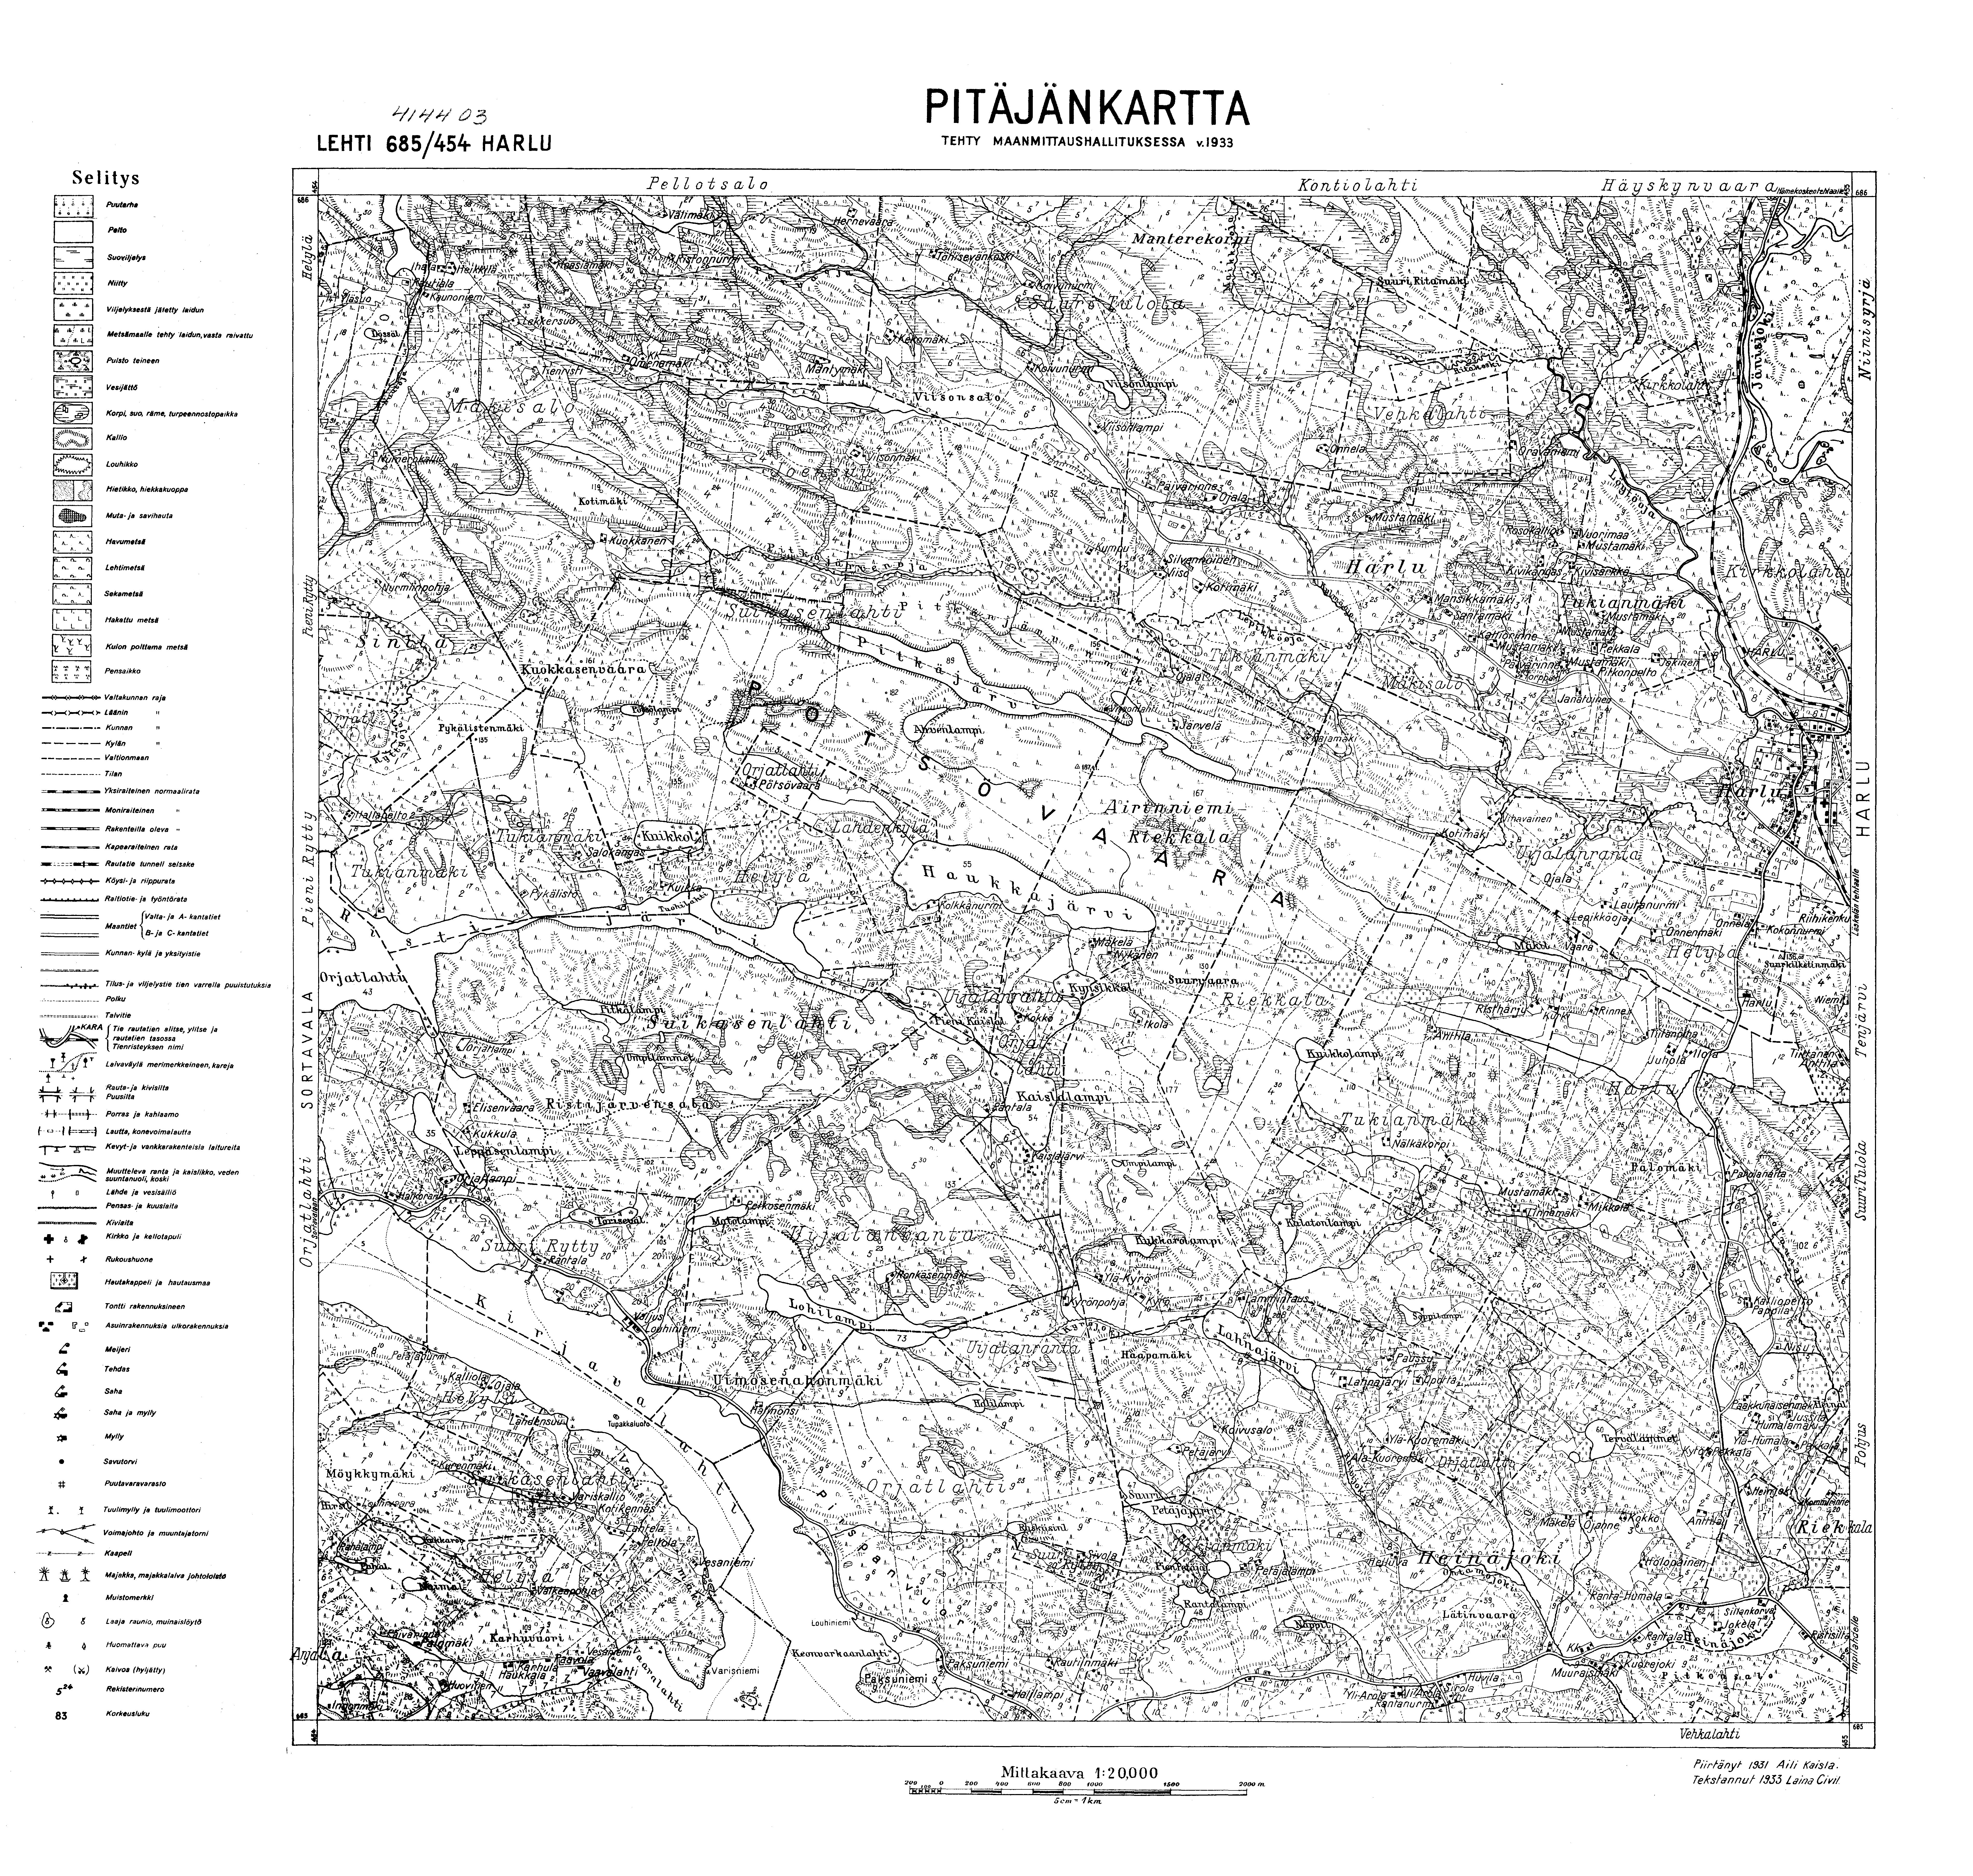 Harlu. Pitäjänkartta 414403. Parish map from 1931. Use the zooming tool to explore in higher level of detail. Obtain as a quality print or high resolution image